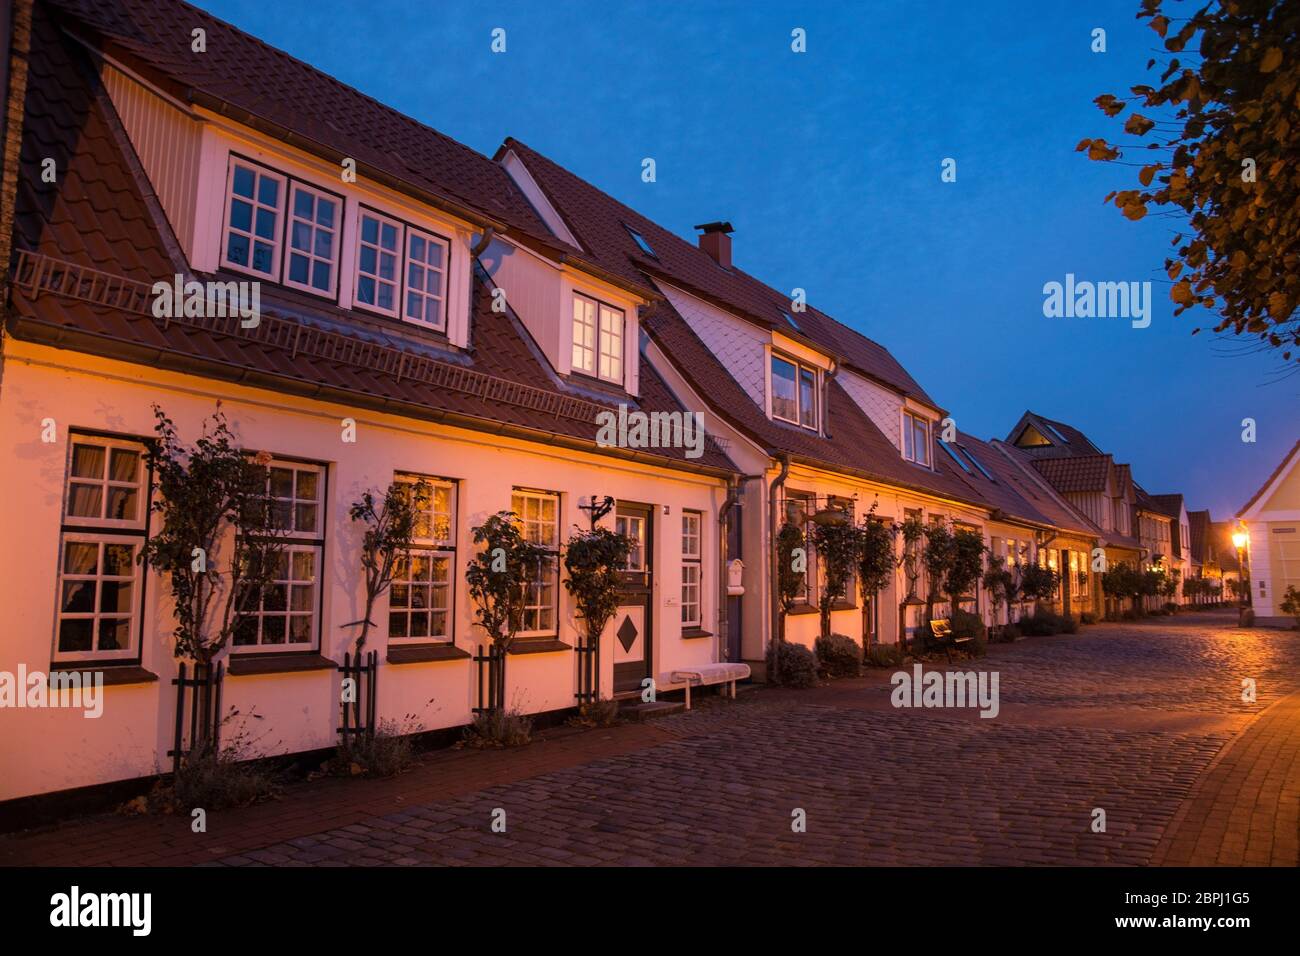 The Holm is a fishermans quarter in Sleswick, Schleswig-Holstein, Germany. Stock Photo